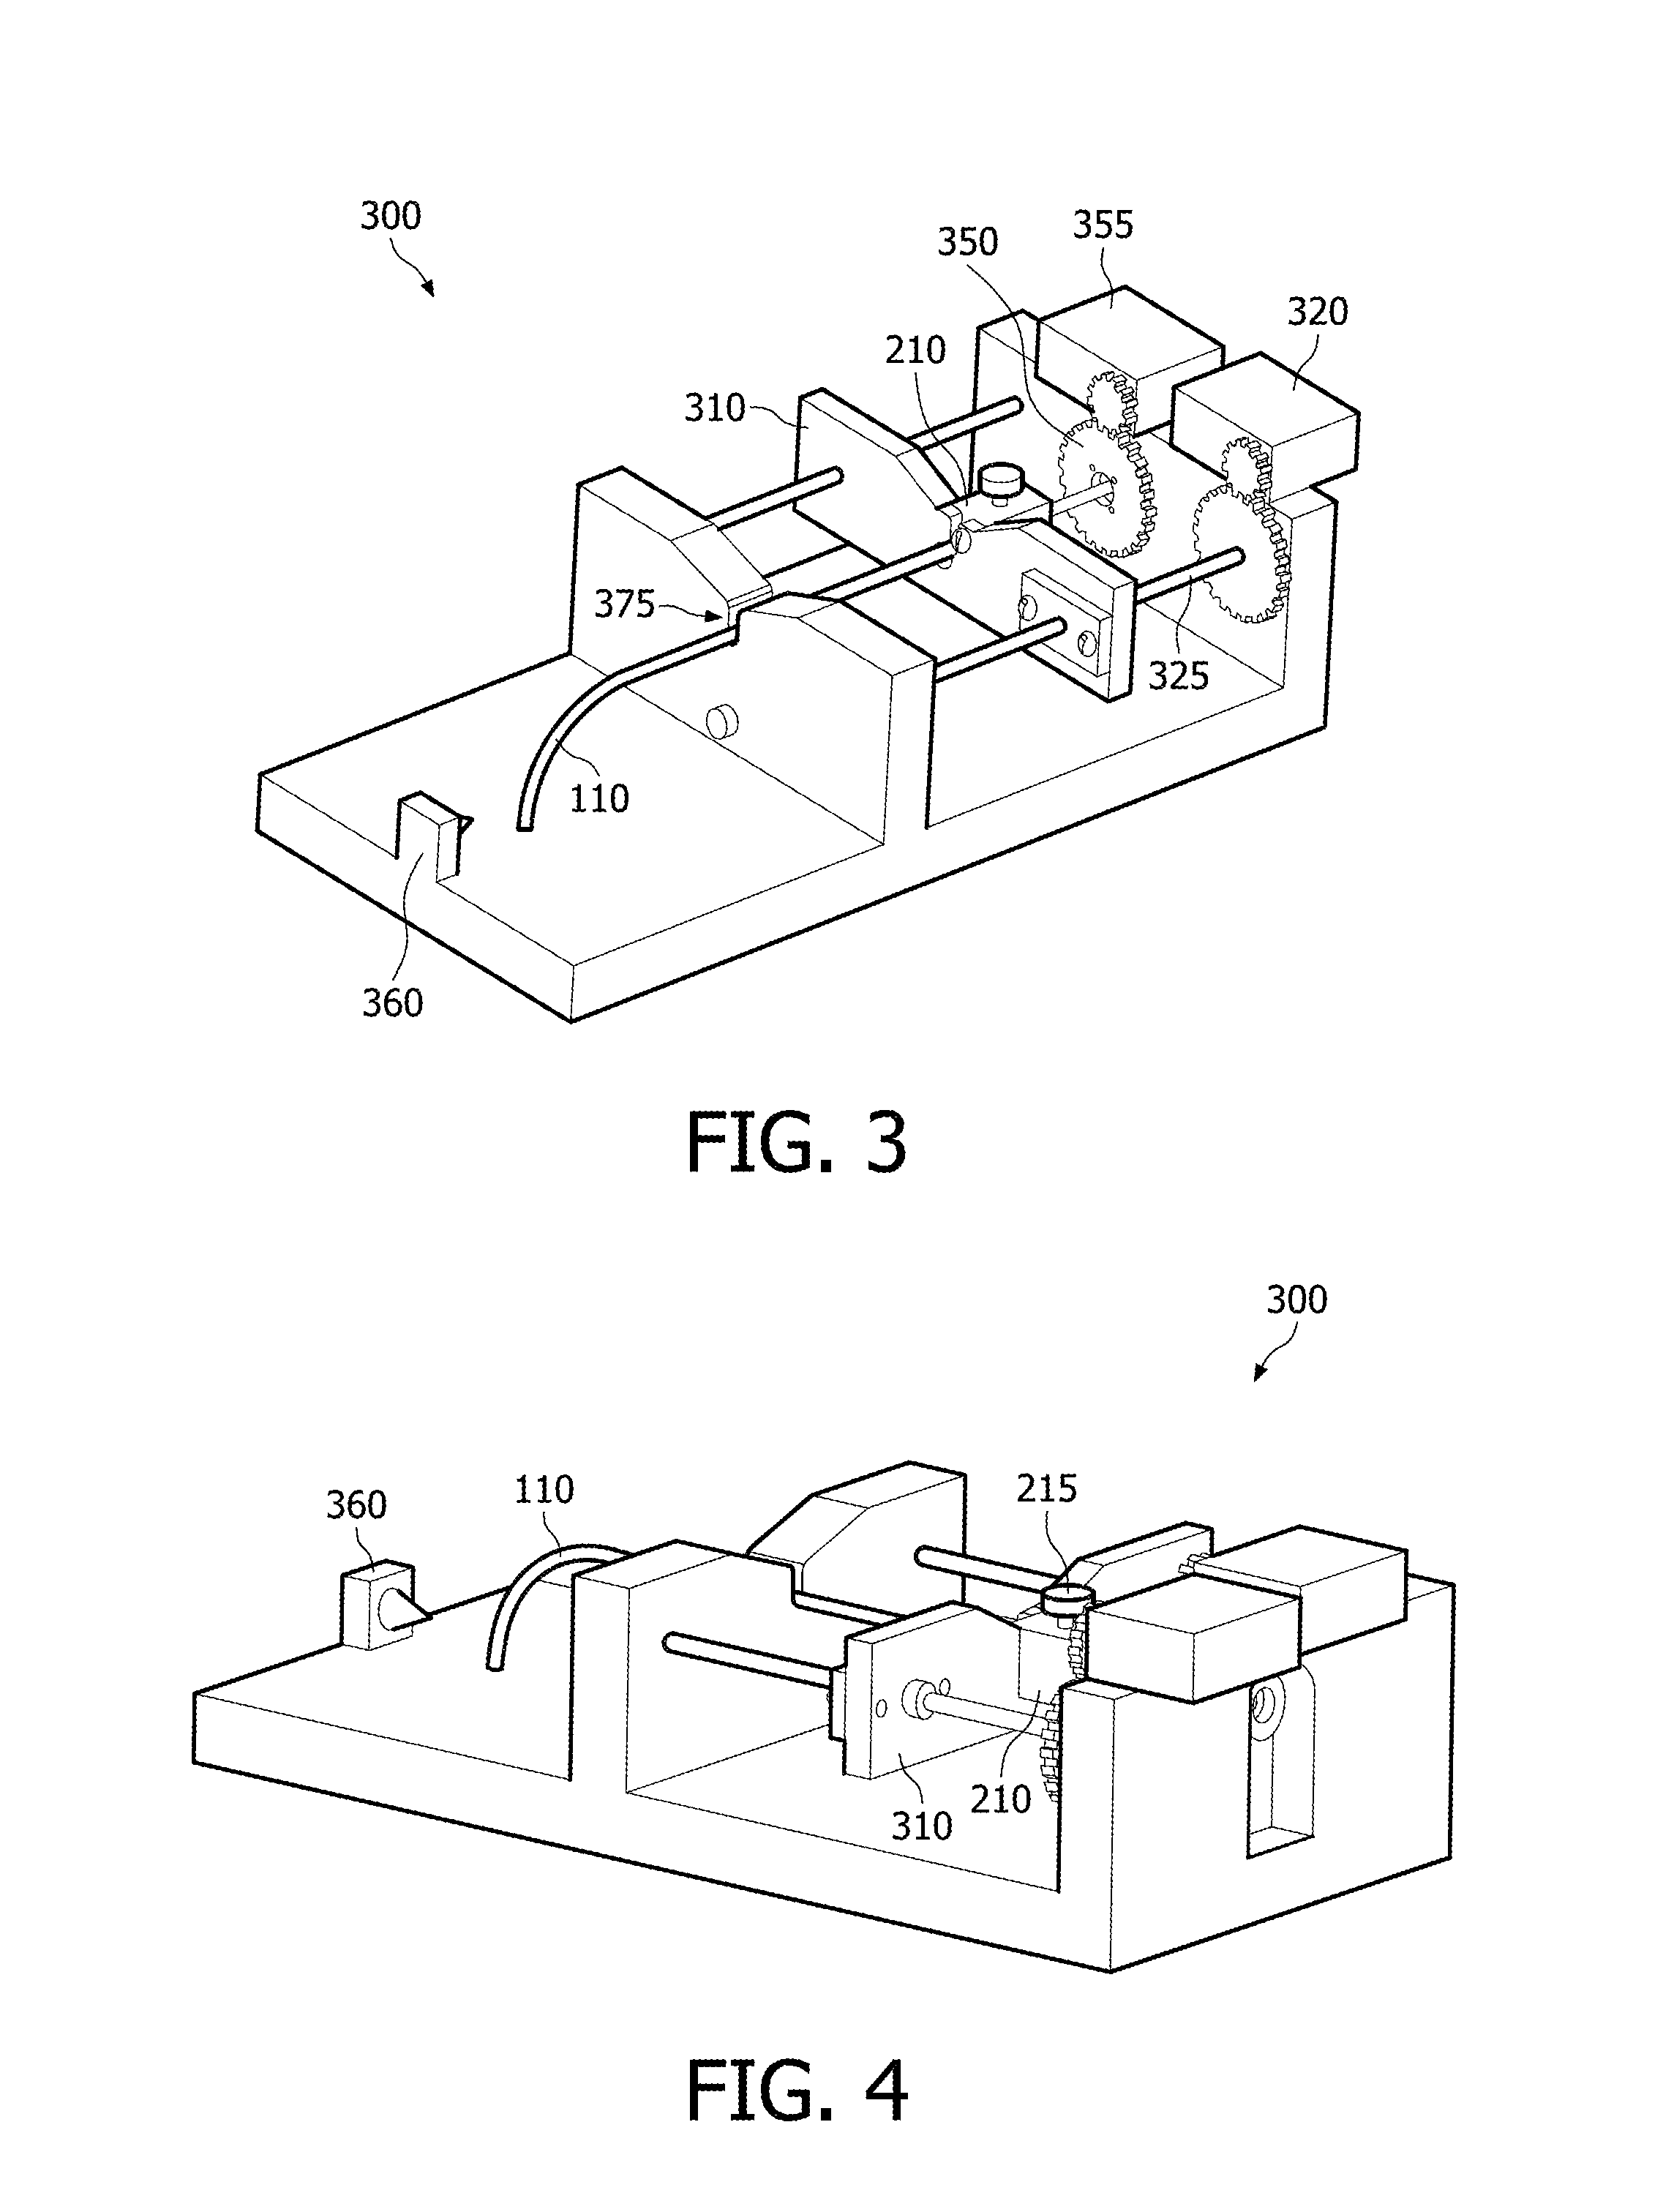 Method and system for cannula positioning